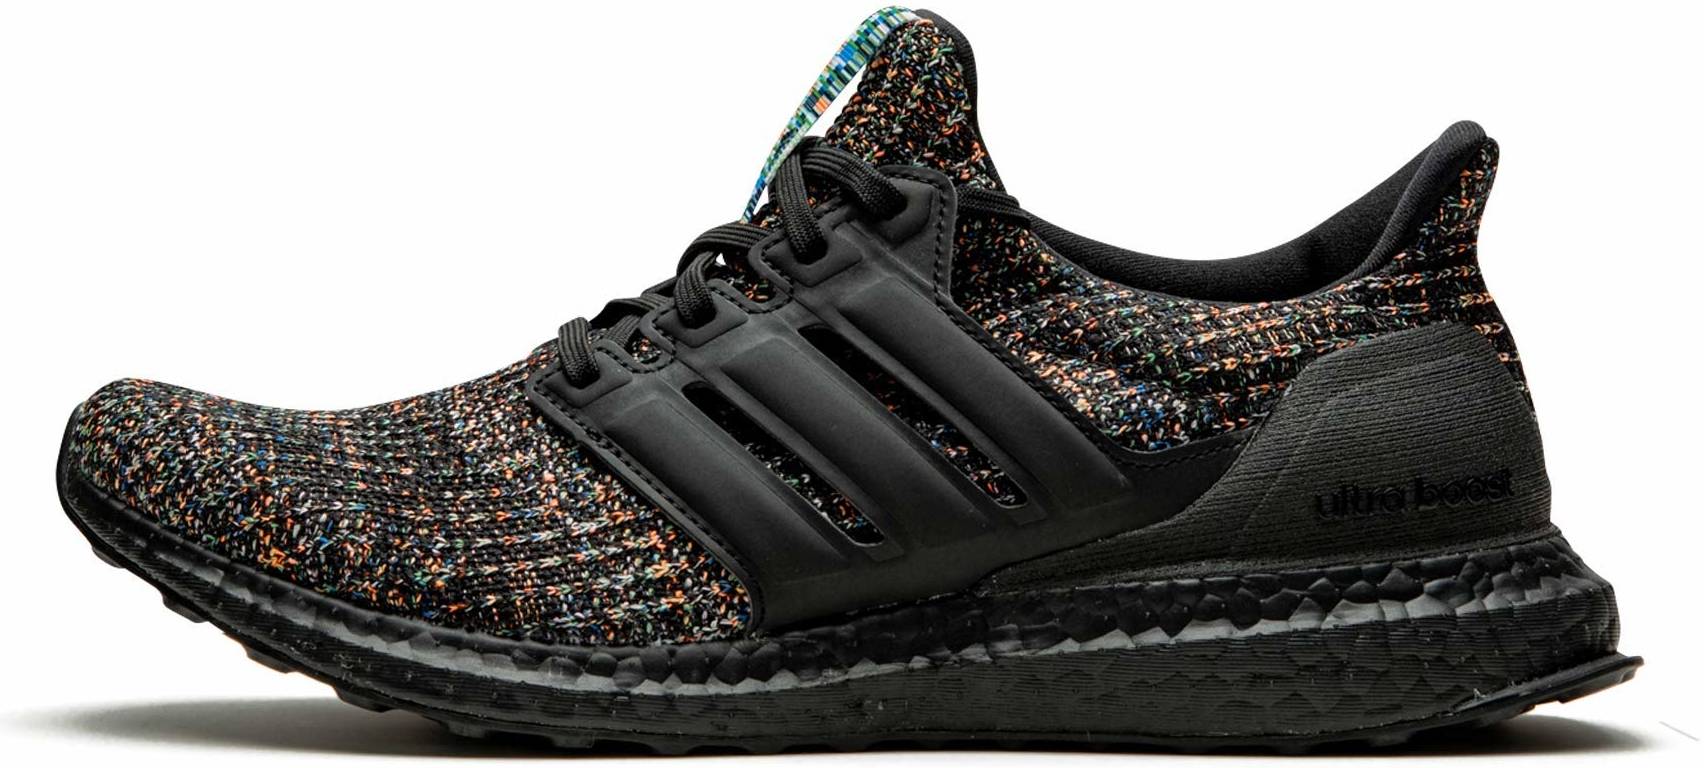 Adidas Ultraboost Multicolor Review 